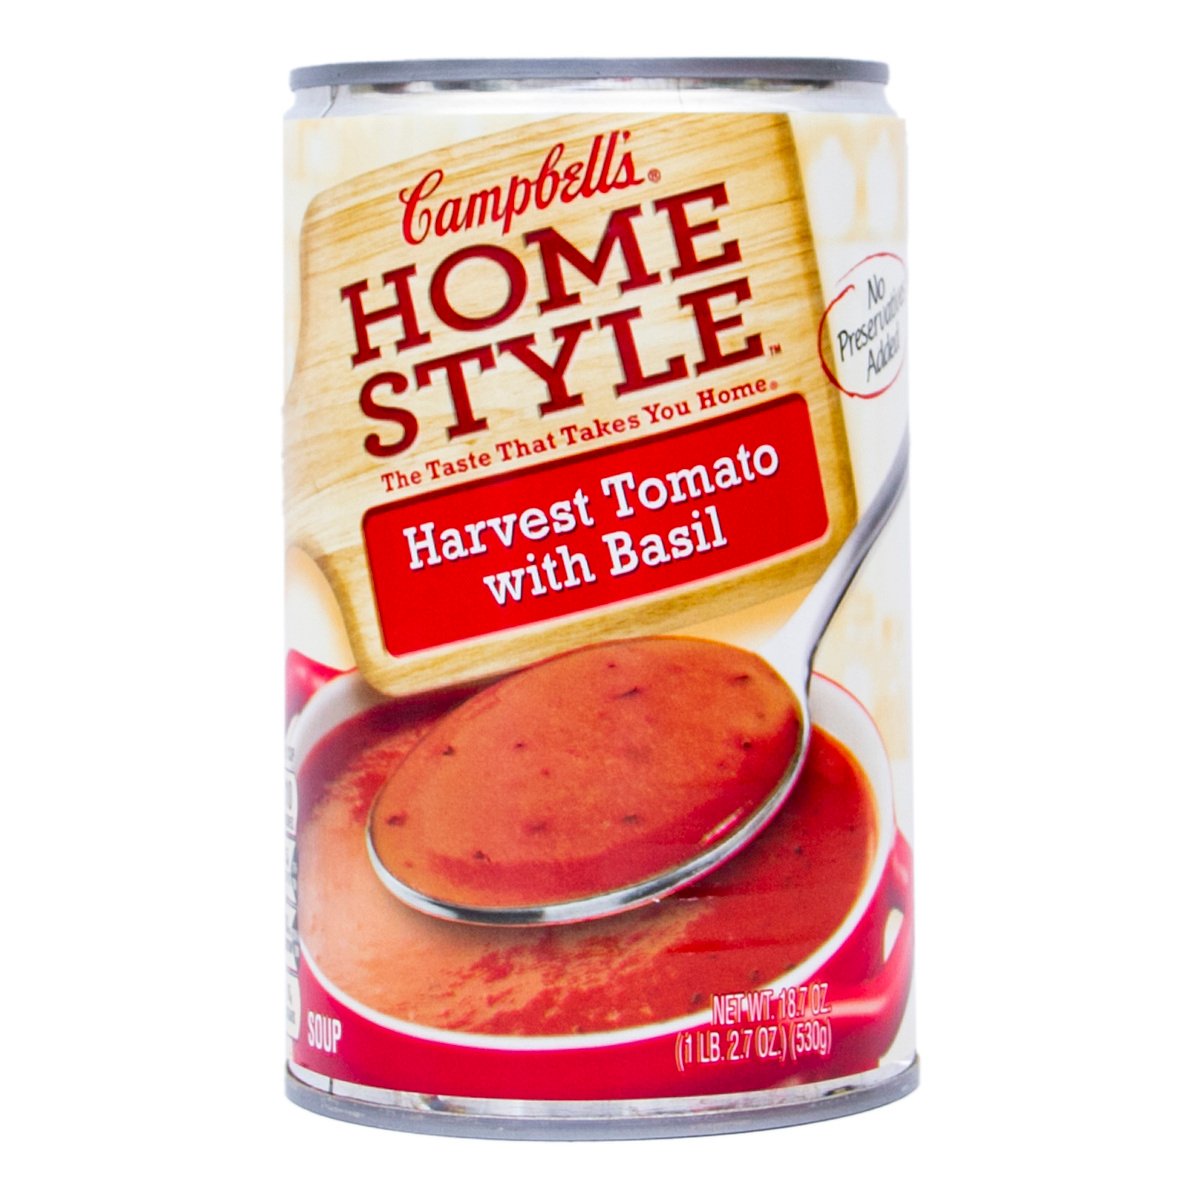 Campbells Home Style Harvest Tomato with Basil 530 g